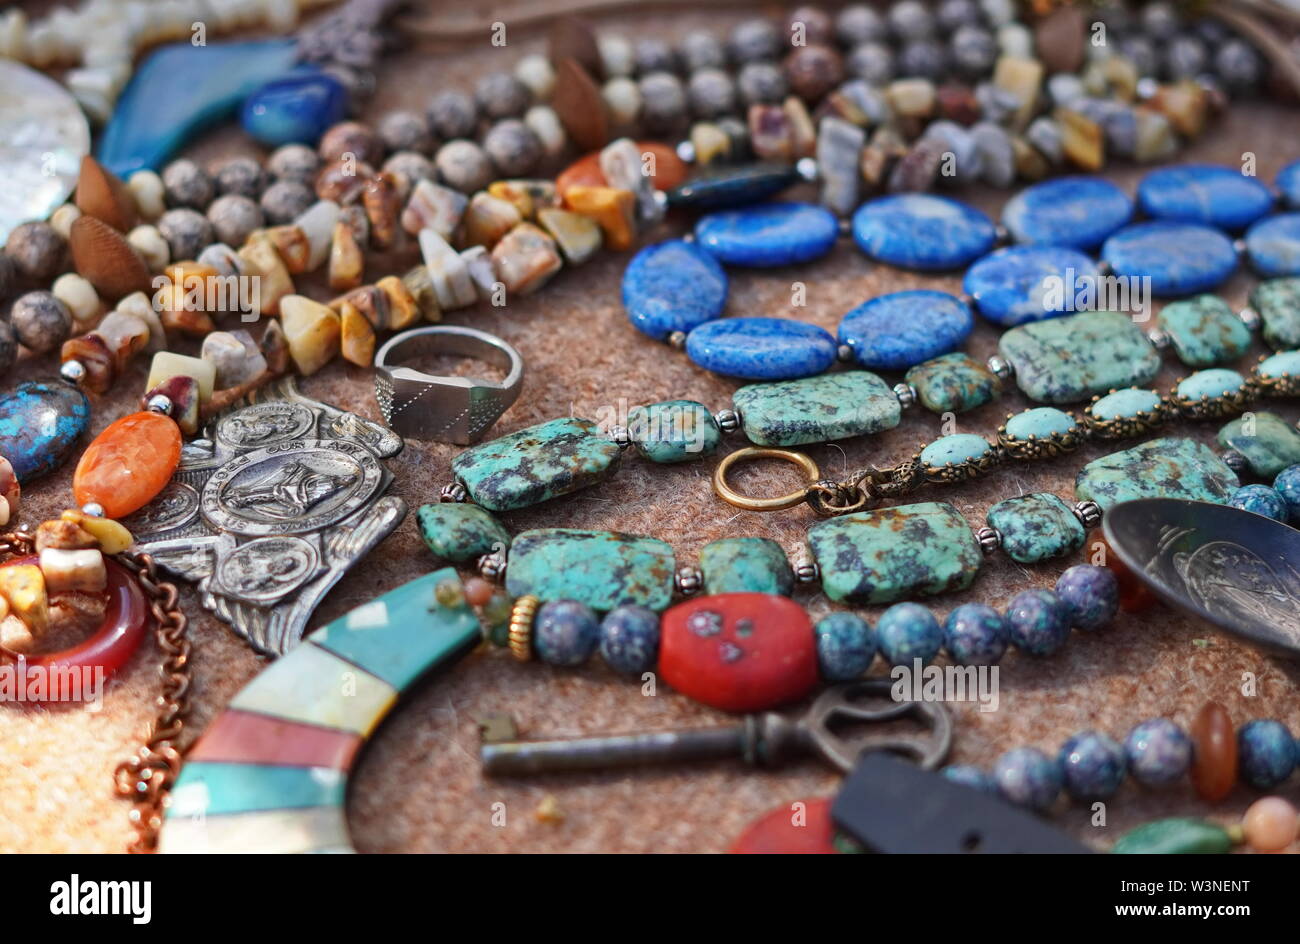 Durham, CT / USA - June 24, 2019: Vintage jewelry on sale at a flea market Stock Photo